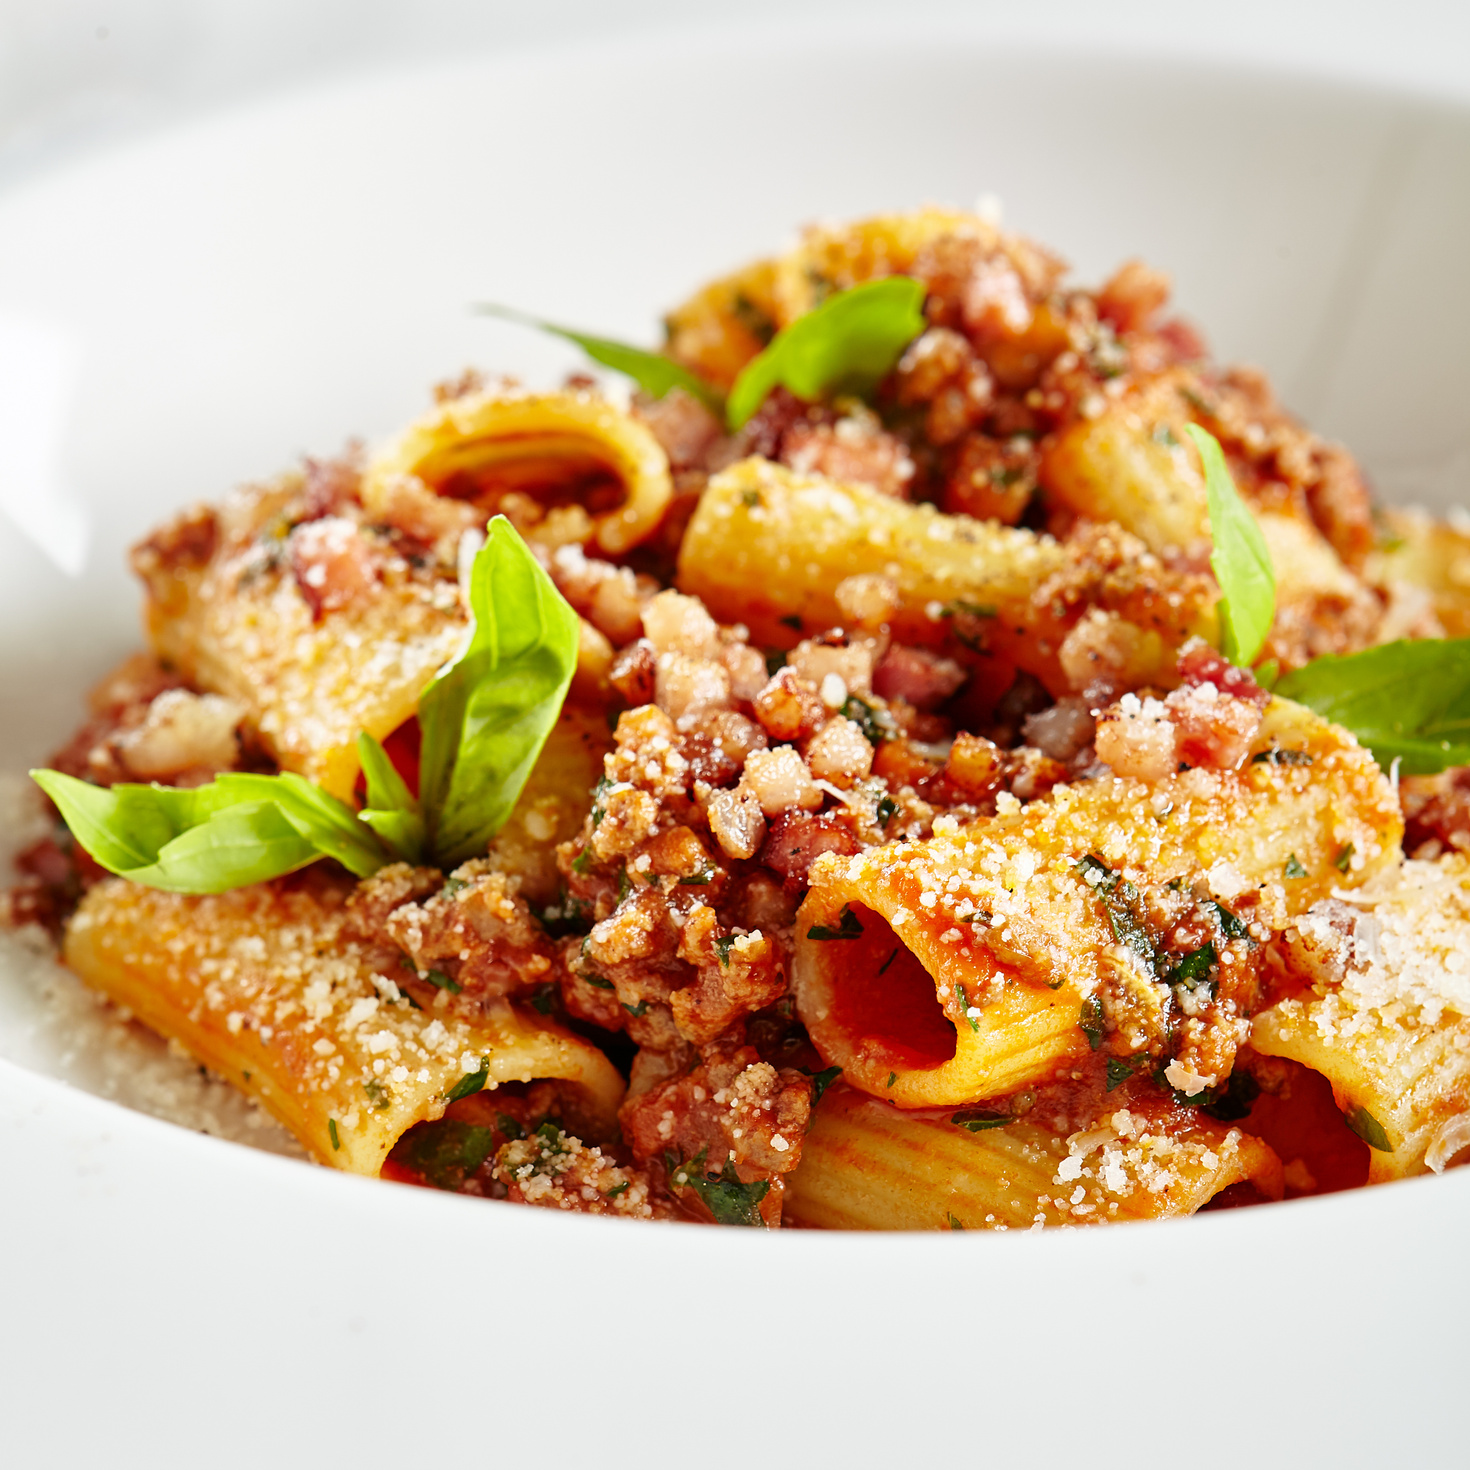 Homemade Rigatoni with Bolognese Sauce